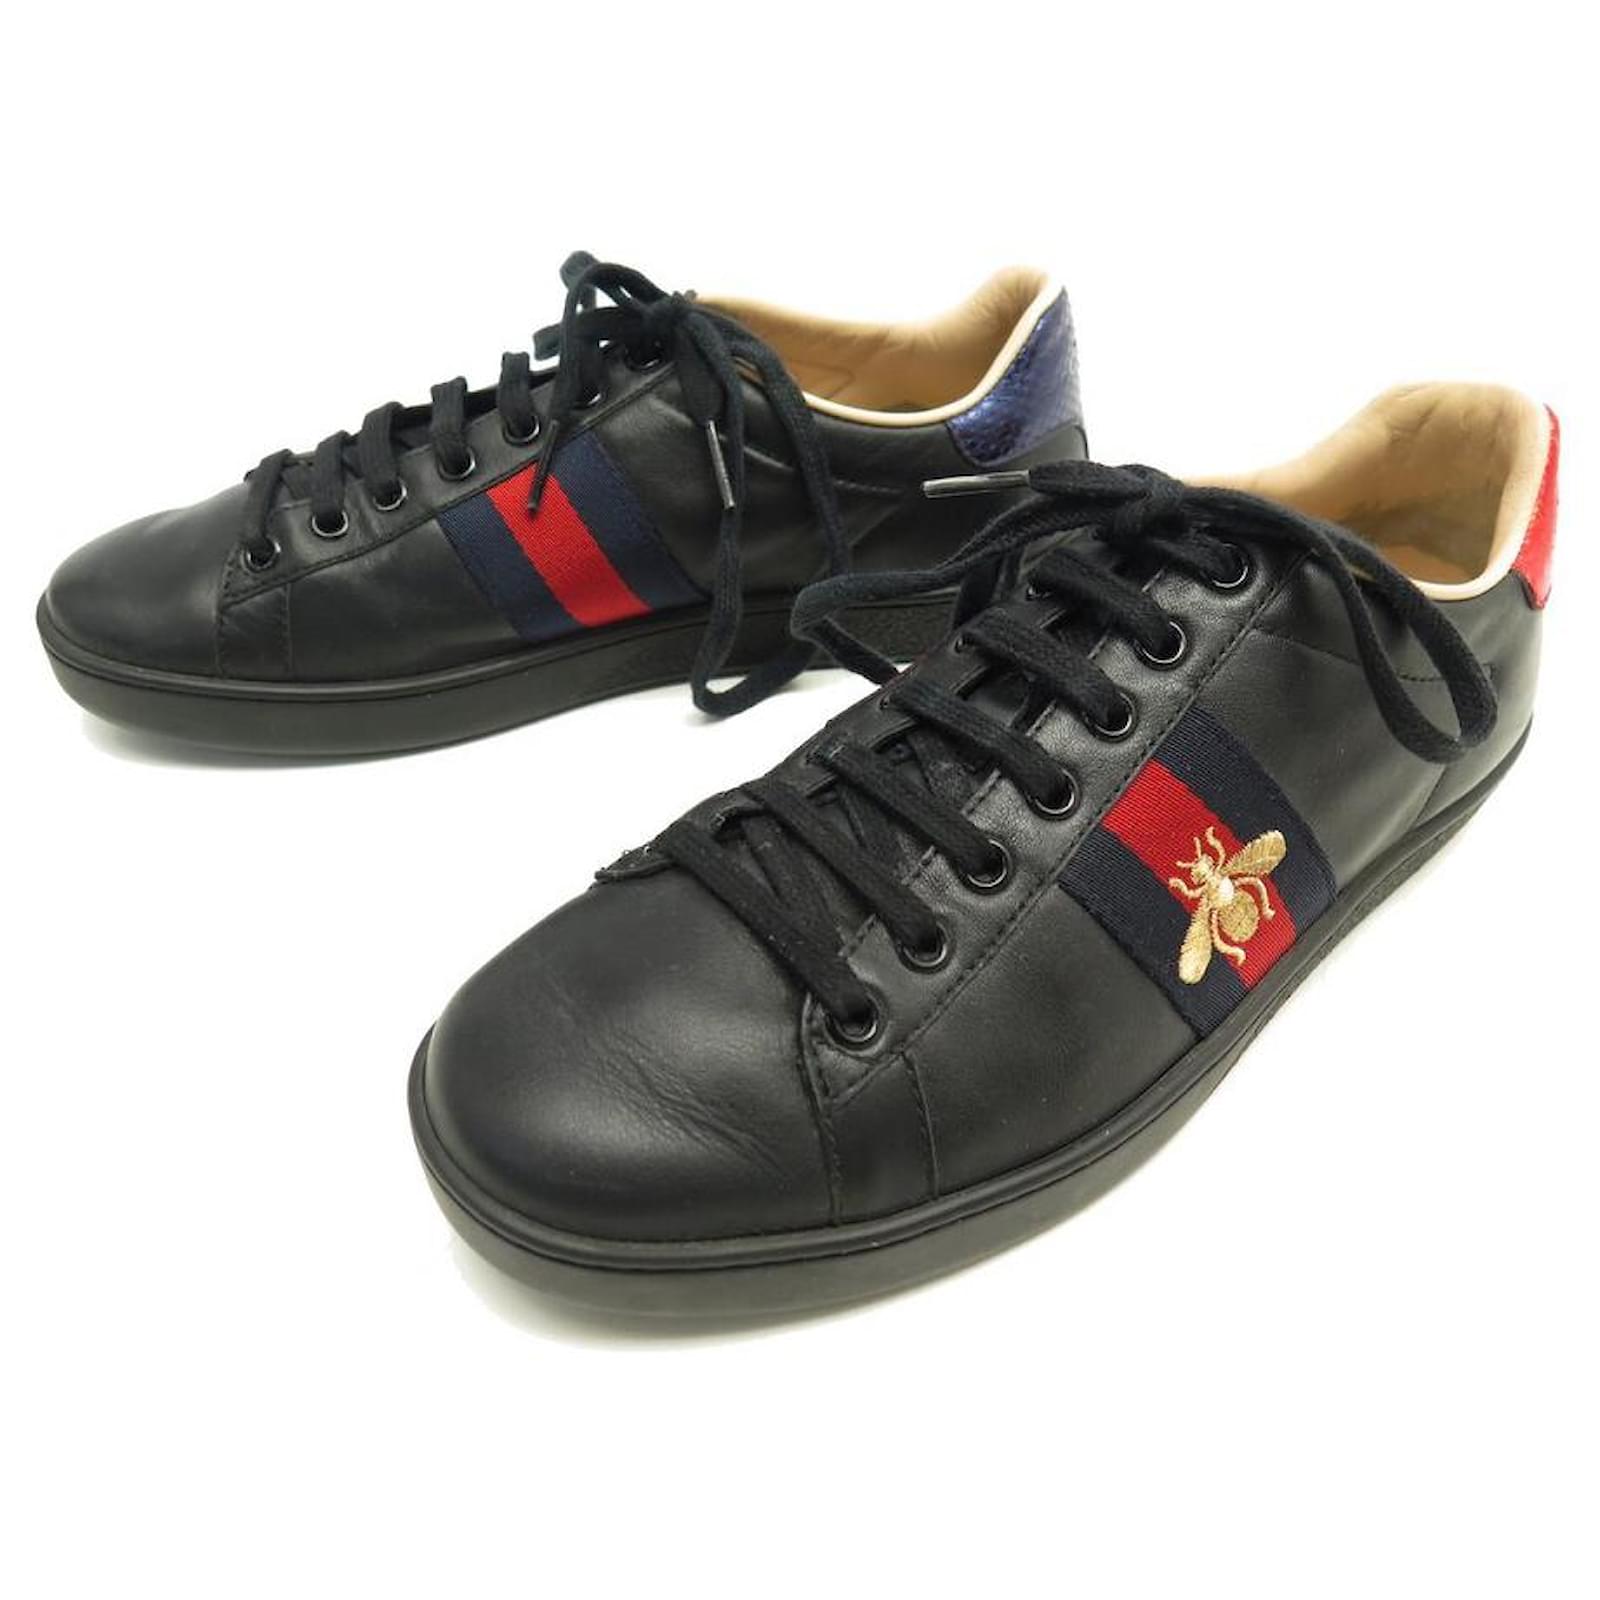 GUCCI EMBROIDERED ACE sneakers SHOES 429446 37 IT 38 EN BLACK